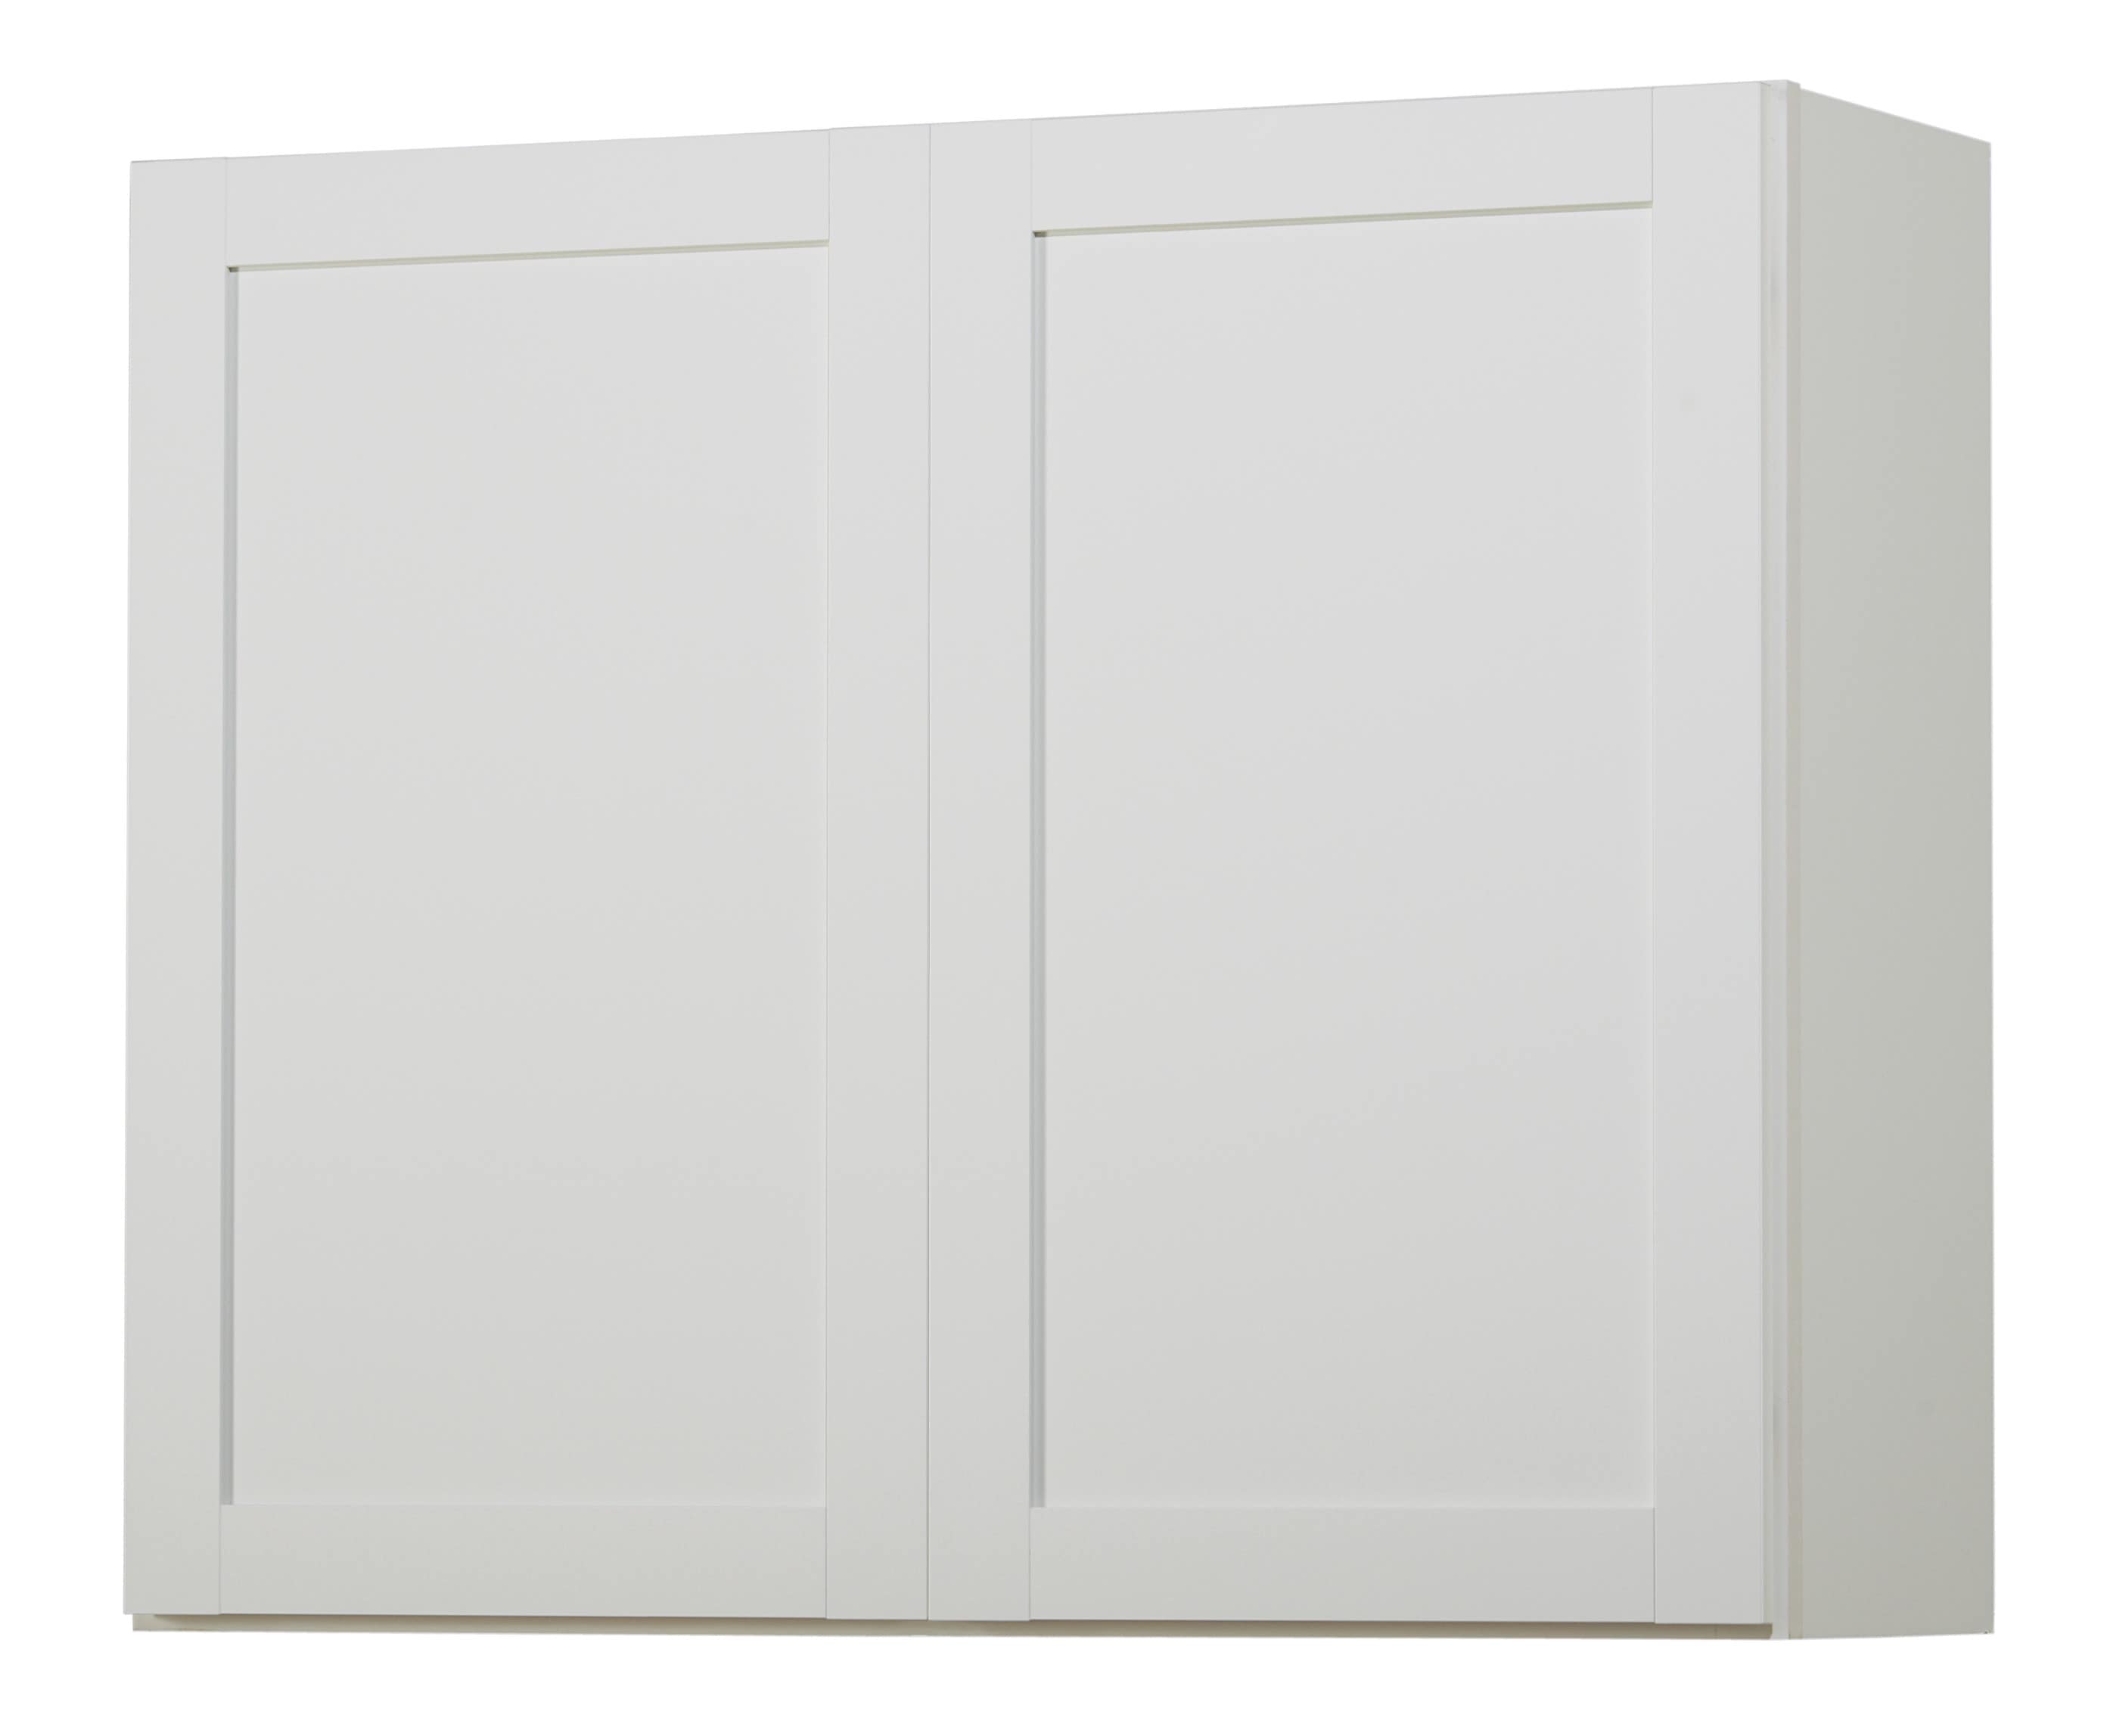 Diamond NOW Arcadia 36-in W x 30-in H x 12-in D White Door Wall Fully ...